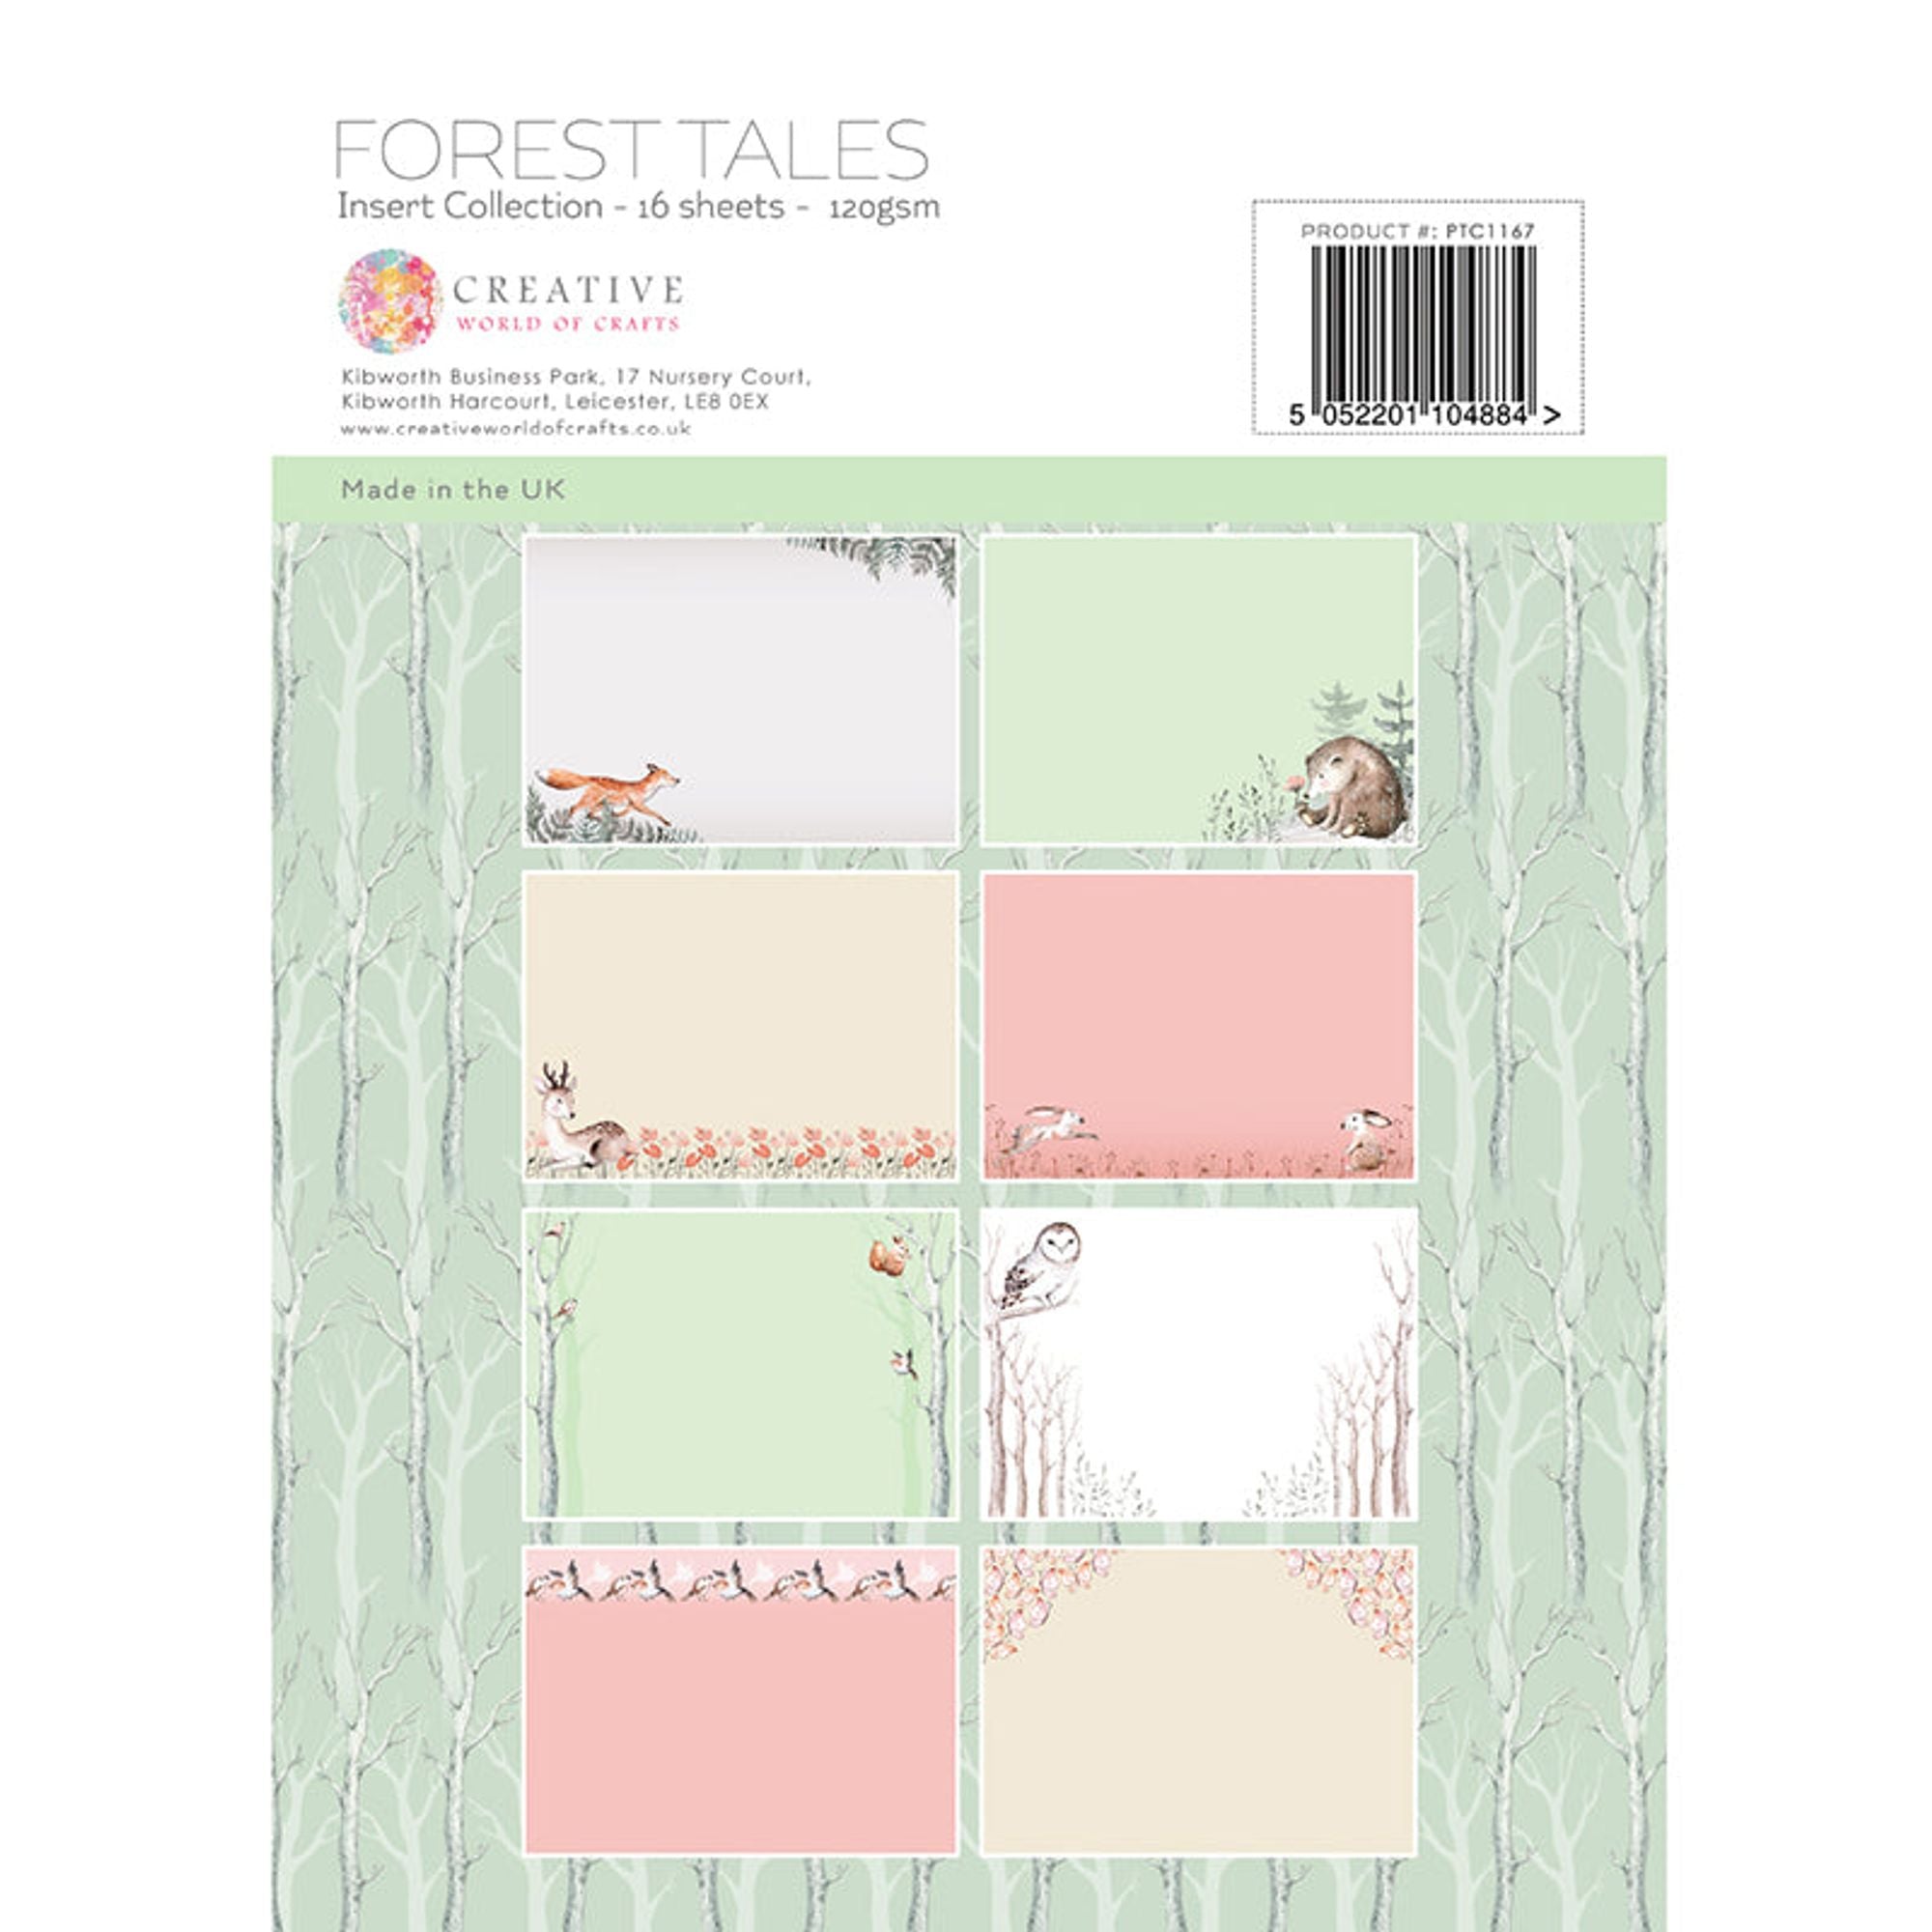 The Paper Tree Forest Tales A4 Insert Collection